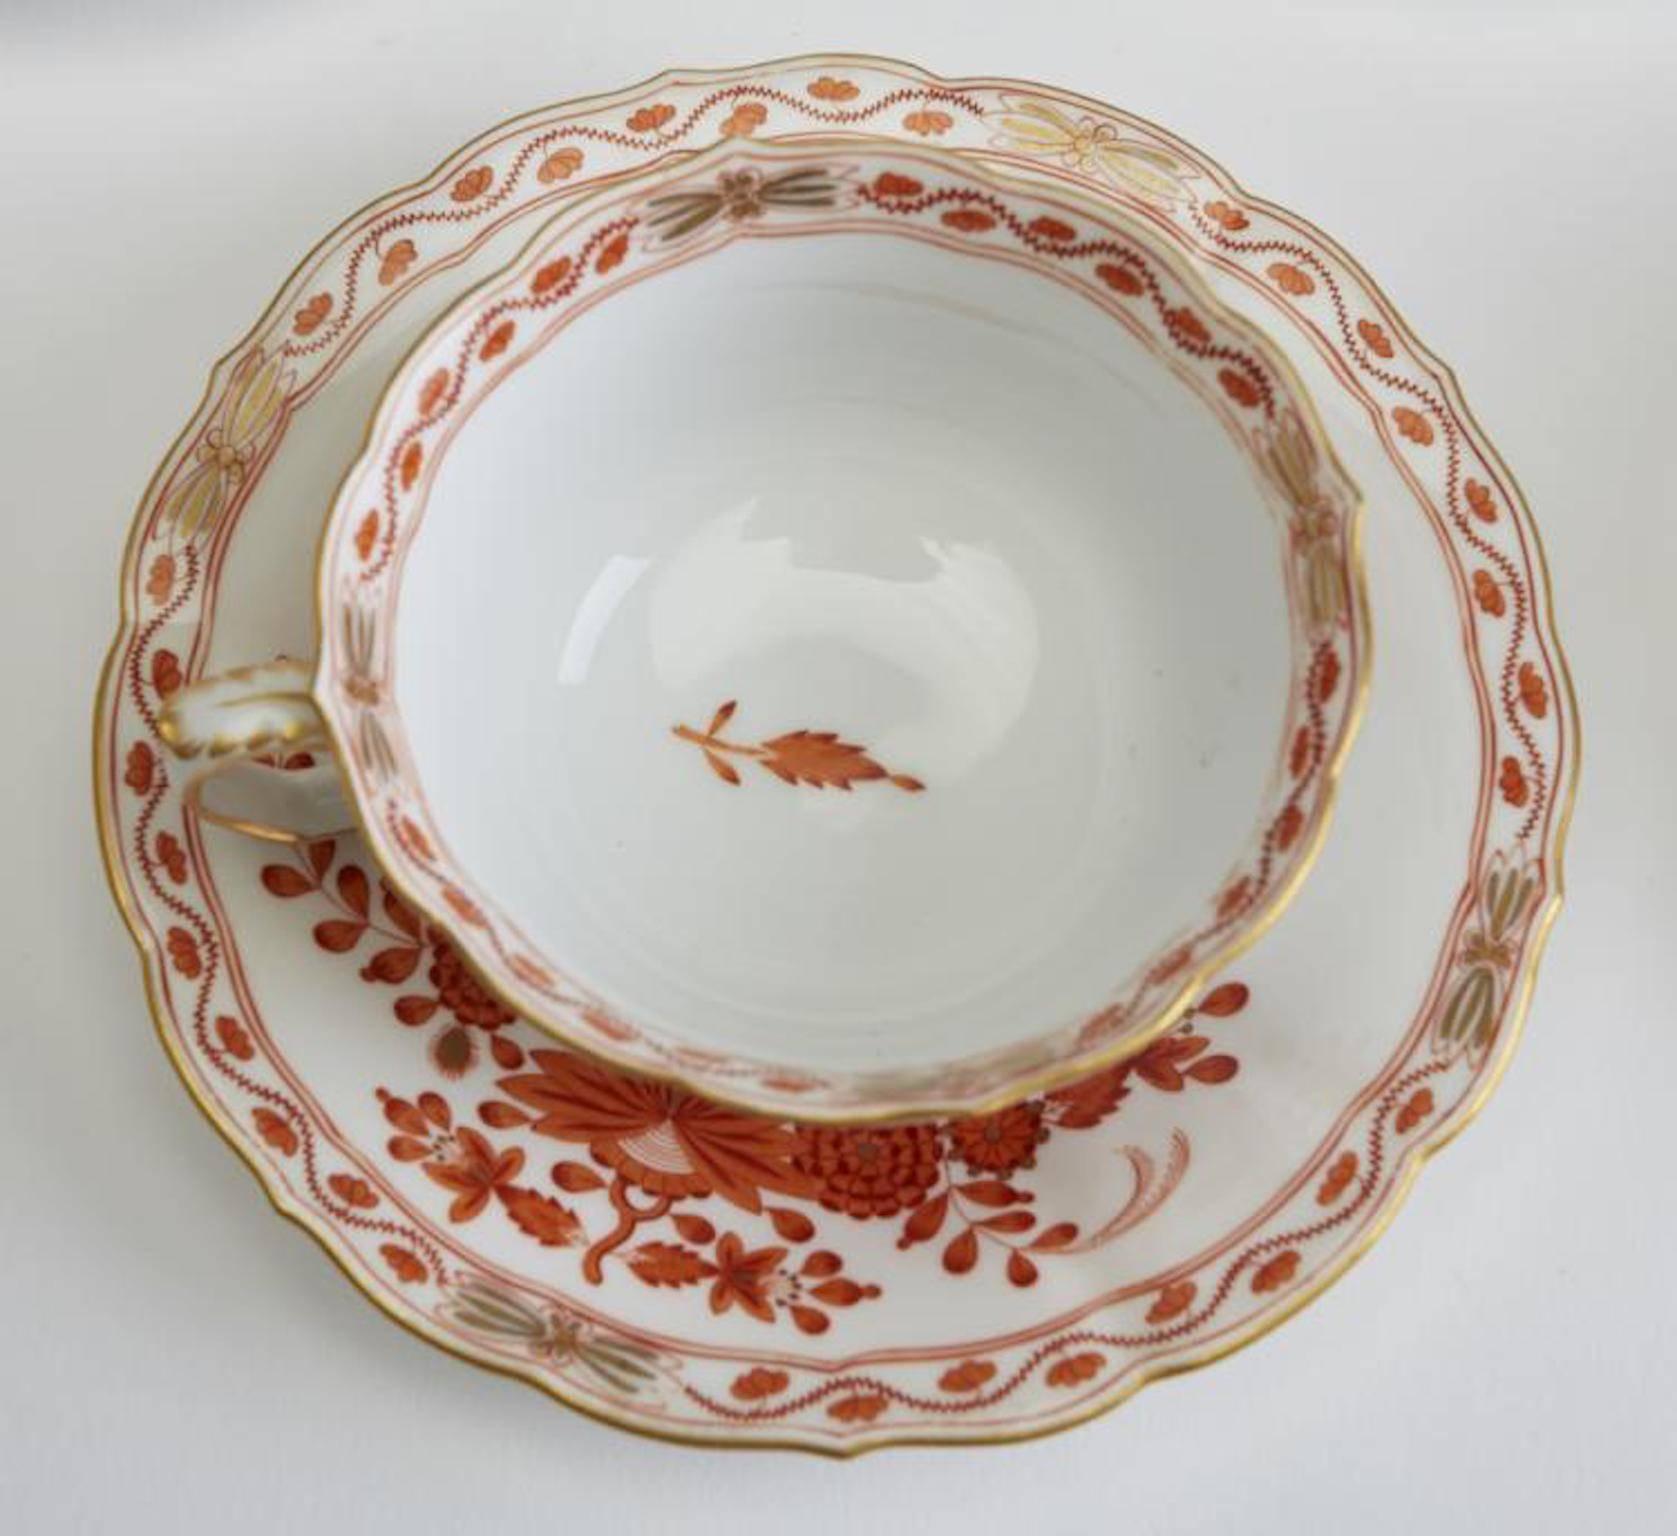 German Meissen porcelain dessert service in the Red Indian Painting pattern. Set has Neuer Ausschnitt shaped rims accented with gold highlights. The coffee pot lid has a stylized rose knob. Each piece bears the Meissen crossed swords mark in